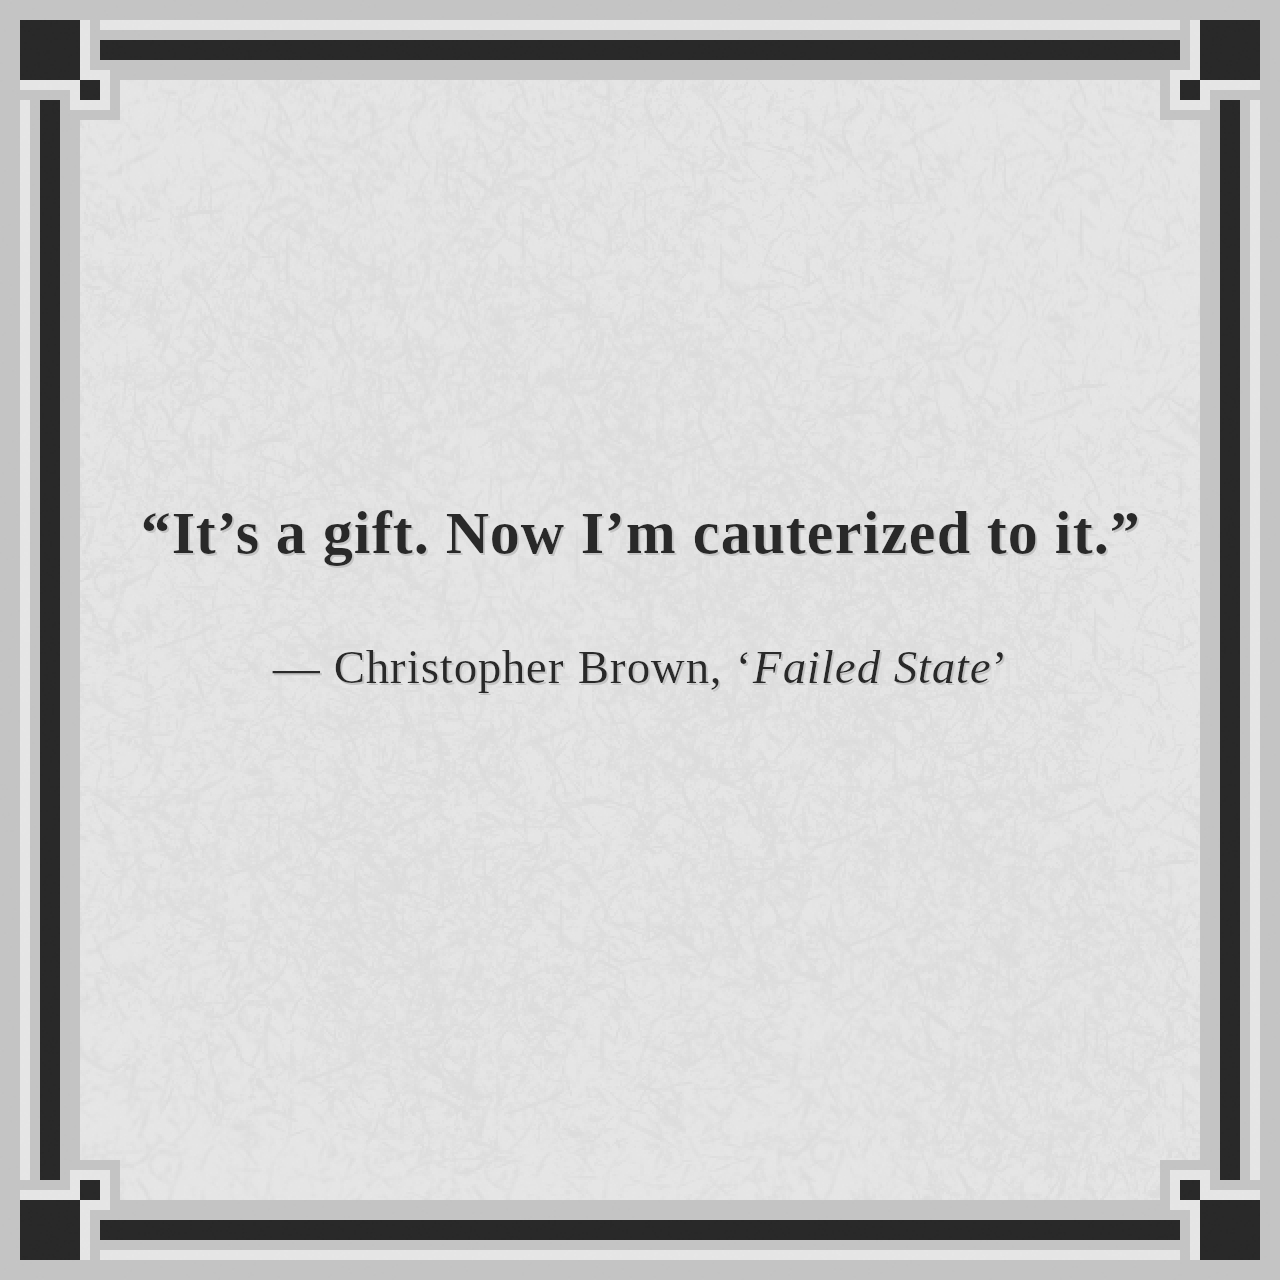 “It’s a gift. Now I’m cauterized to it.”

— Christopher Brown, ‘Failed State’